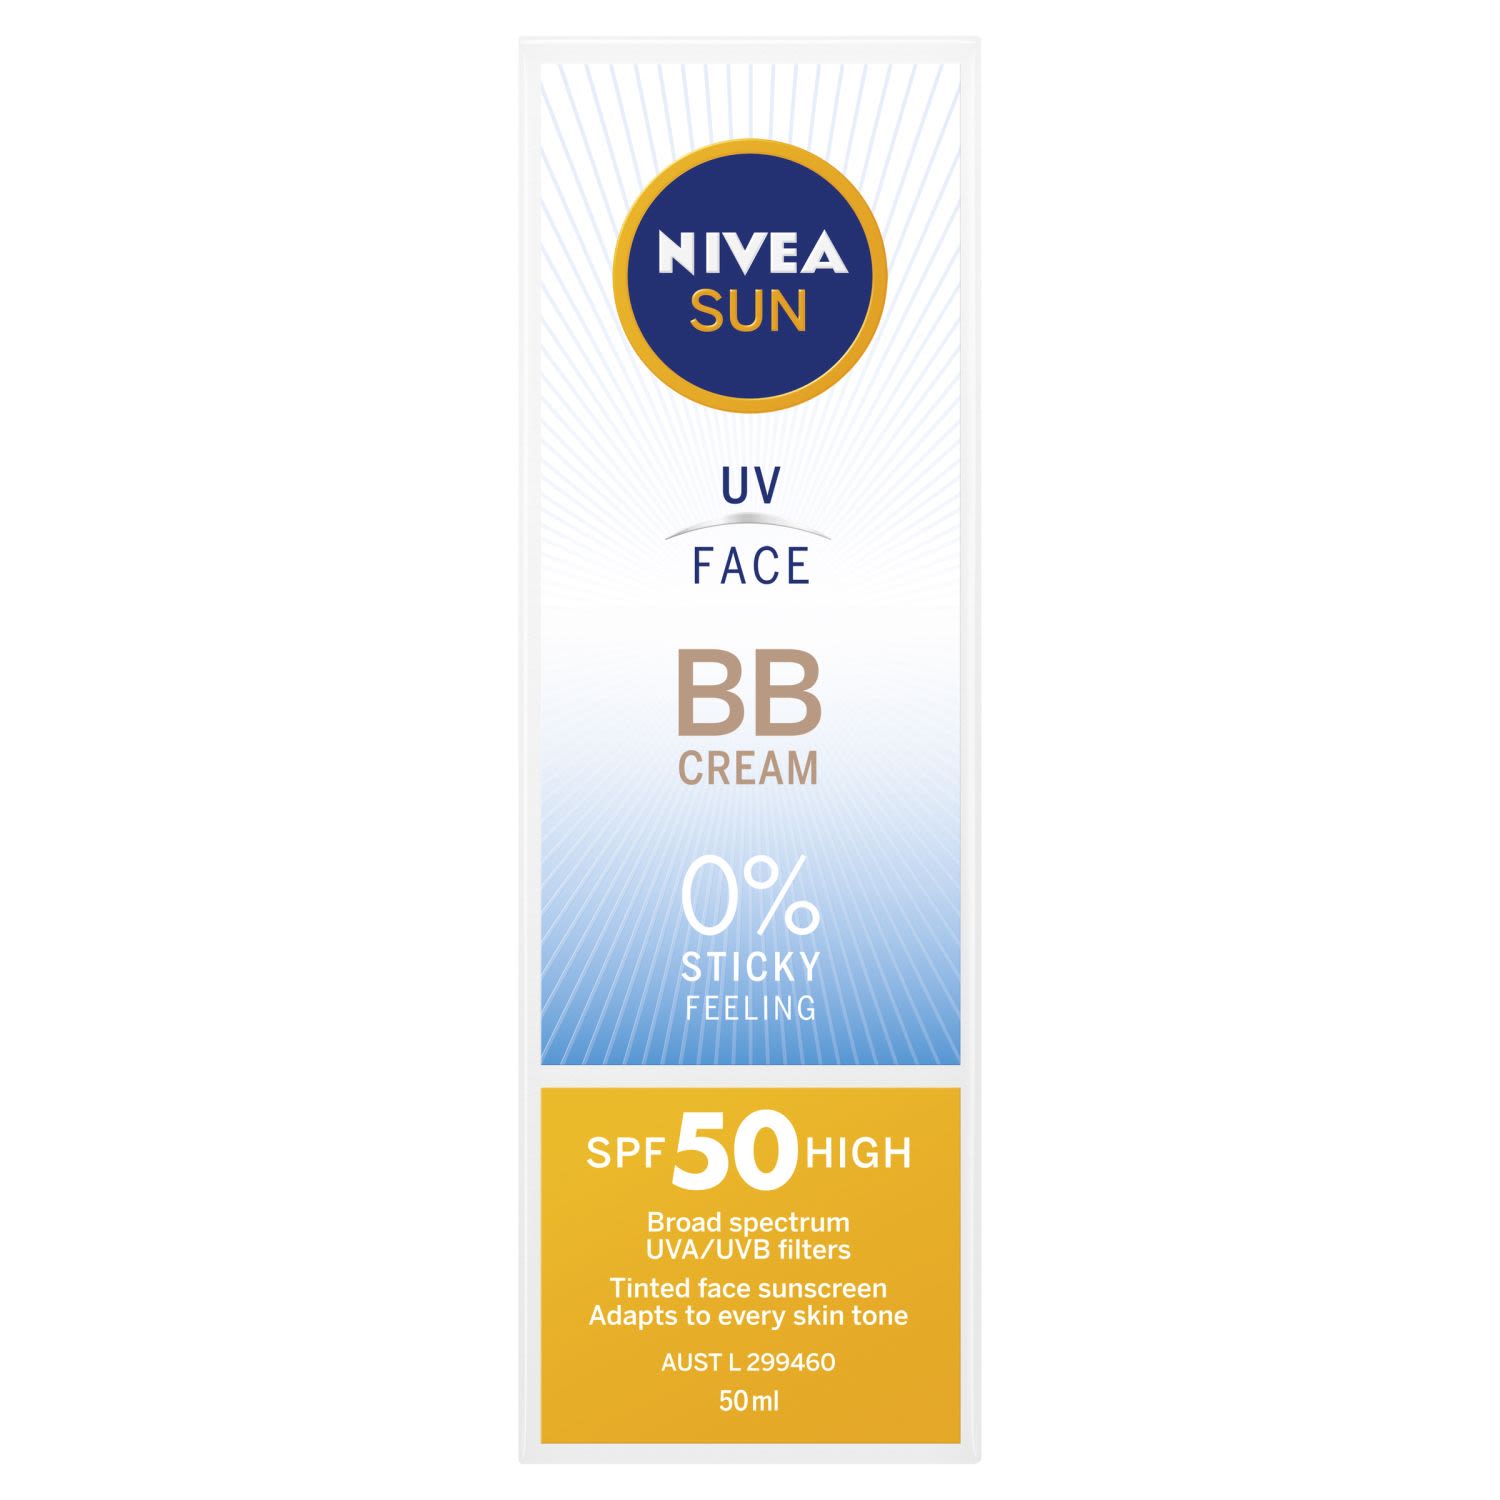 NIVEA SUN UV Face BB Cream provides highly effective UVA/UVB protection against sunburn and premature skin ageing. The eye friendly, ophthalmologically proven, formula with a naturally derived antioxidant supports facial skin to protect itself against sun damages. The moisturising, skin compatibility and dermatologically proven tinted face sunscreen is ideal for every day use. It adapts to every skin tone, is non greasy, non sticky and leaves a light feeling on your skin.<br /> <br />